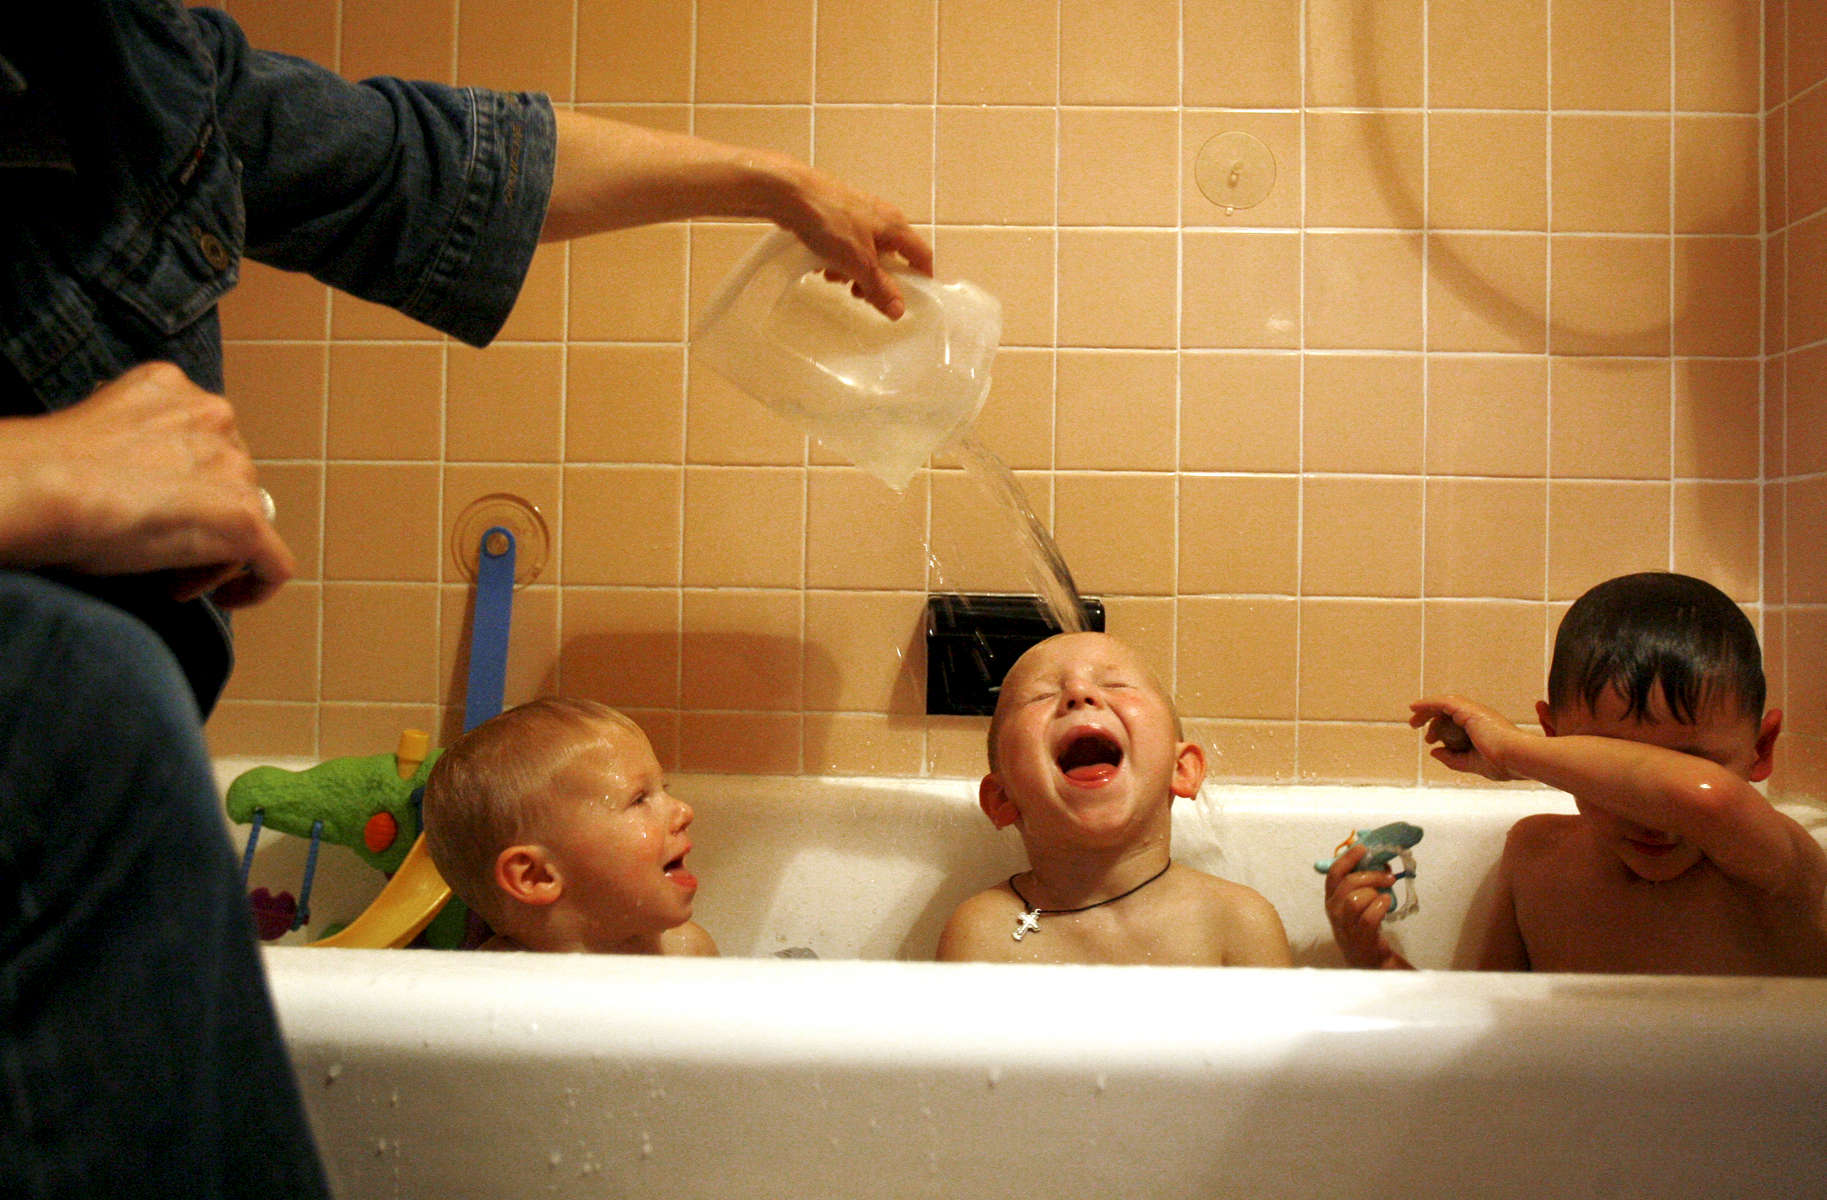 Stefanie Senkiw Krebs pours water over the head of her new son Patrick, 4, while he bathes with his biological brother Joseph, 2, (left) and adoptive brother Peter, 4. Senkiw Krebs and her husband had just returned to their N.Y. home after adopting three brothers from the Ukraine, bringing their family to a total of four adopted children.